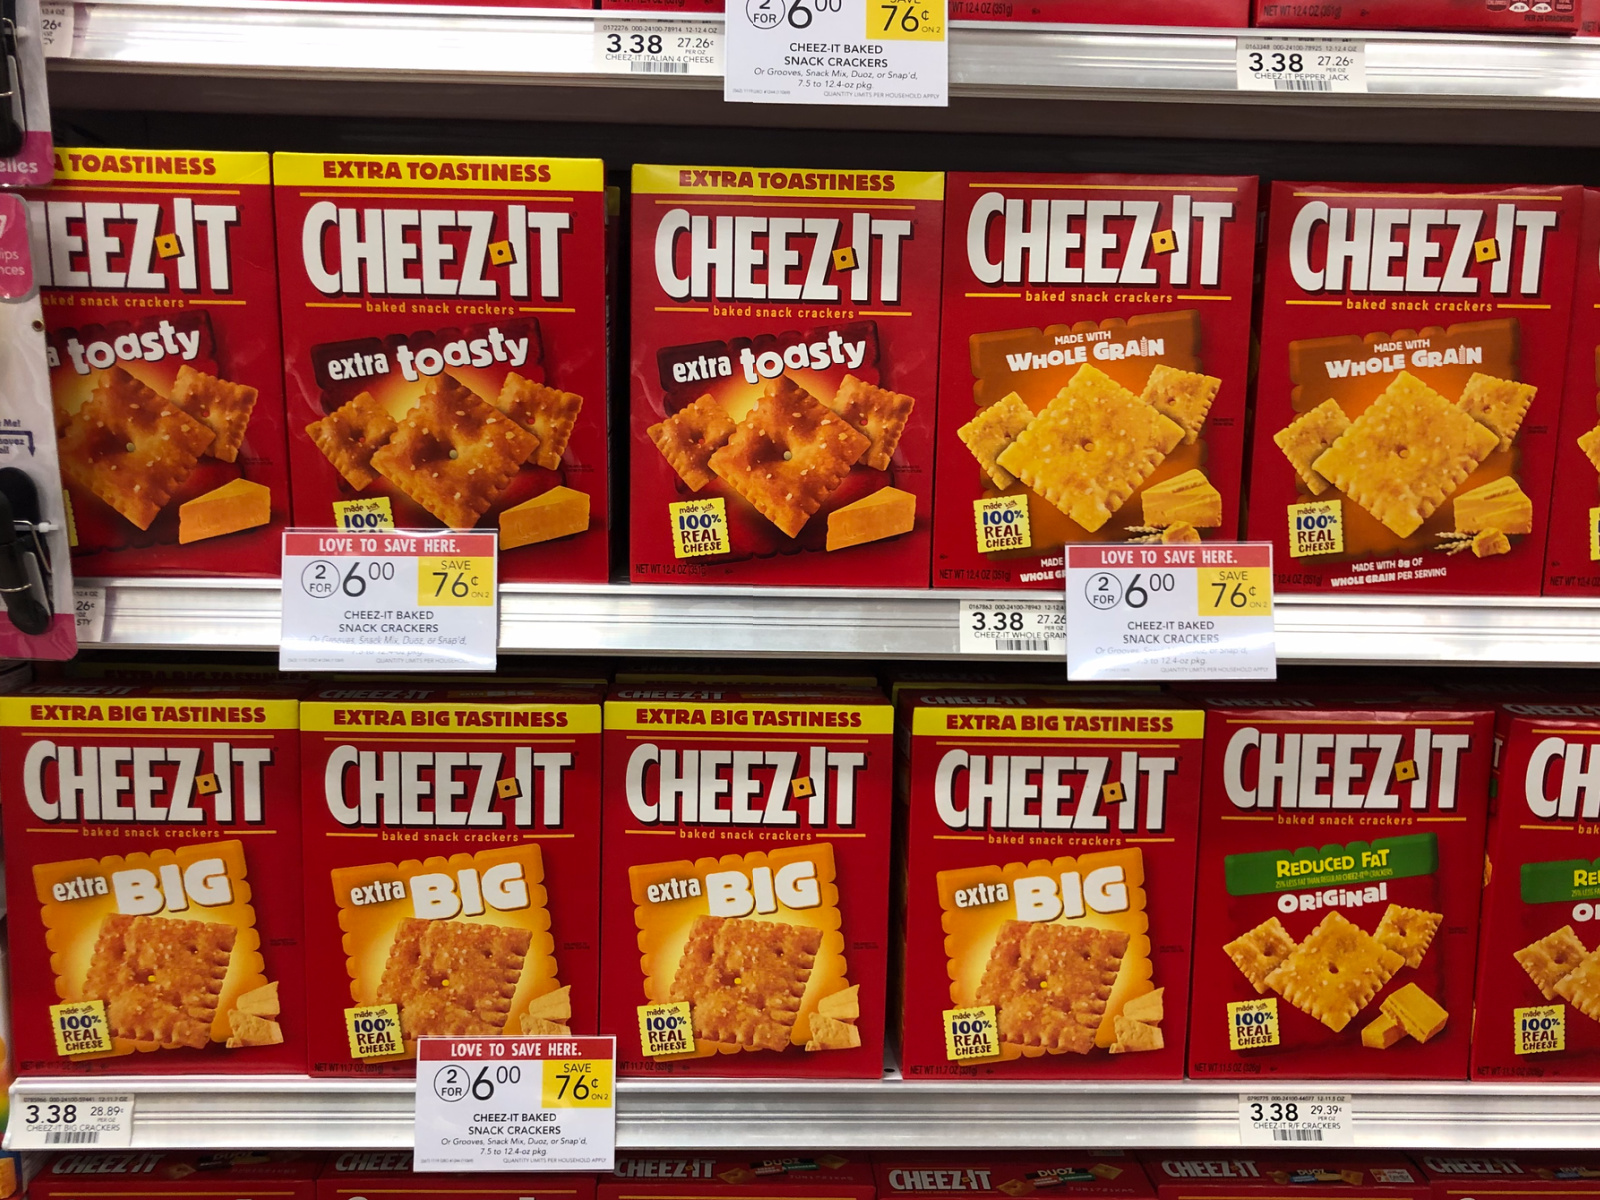 Pick Up A Great Deal On A Bowl Season Must-Have...Cheez-It Crackers On Sale 2/$6 At Publix! on I Heart Publix 1